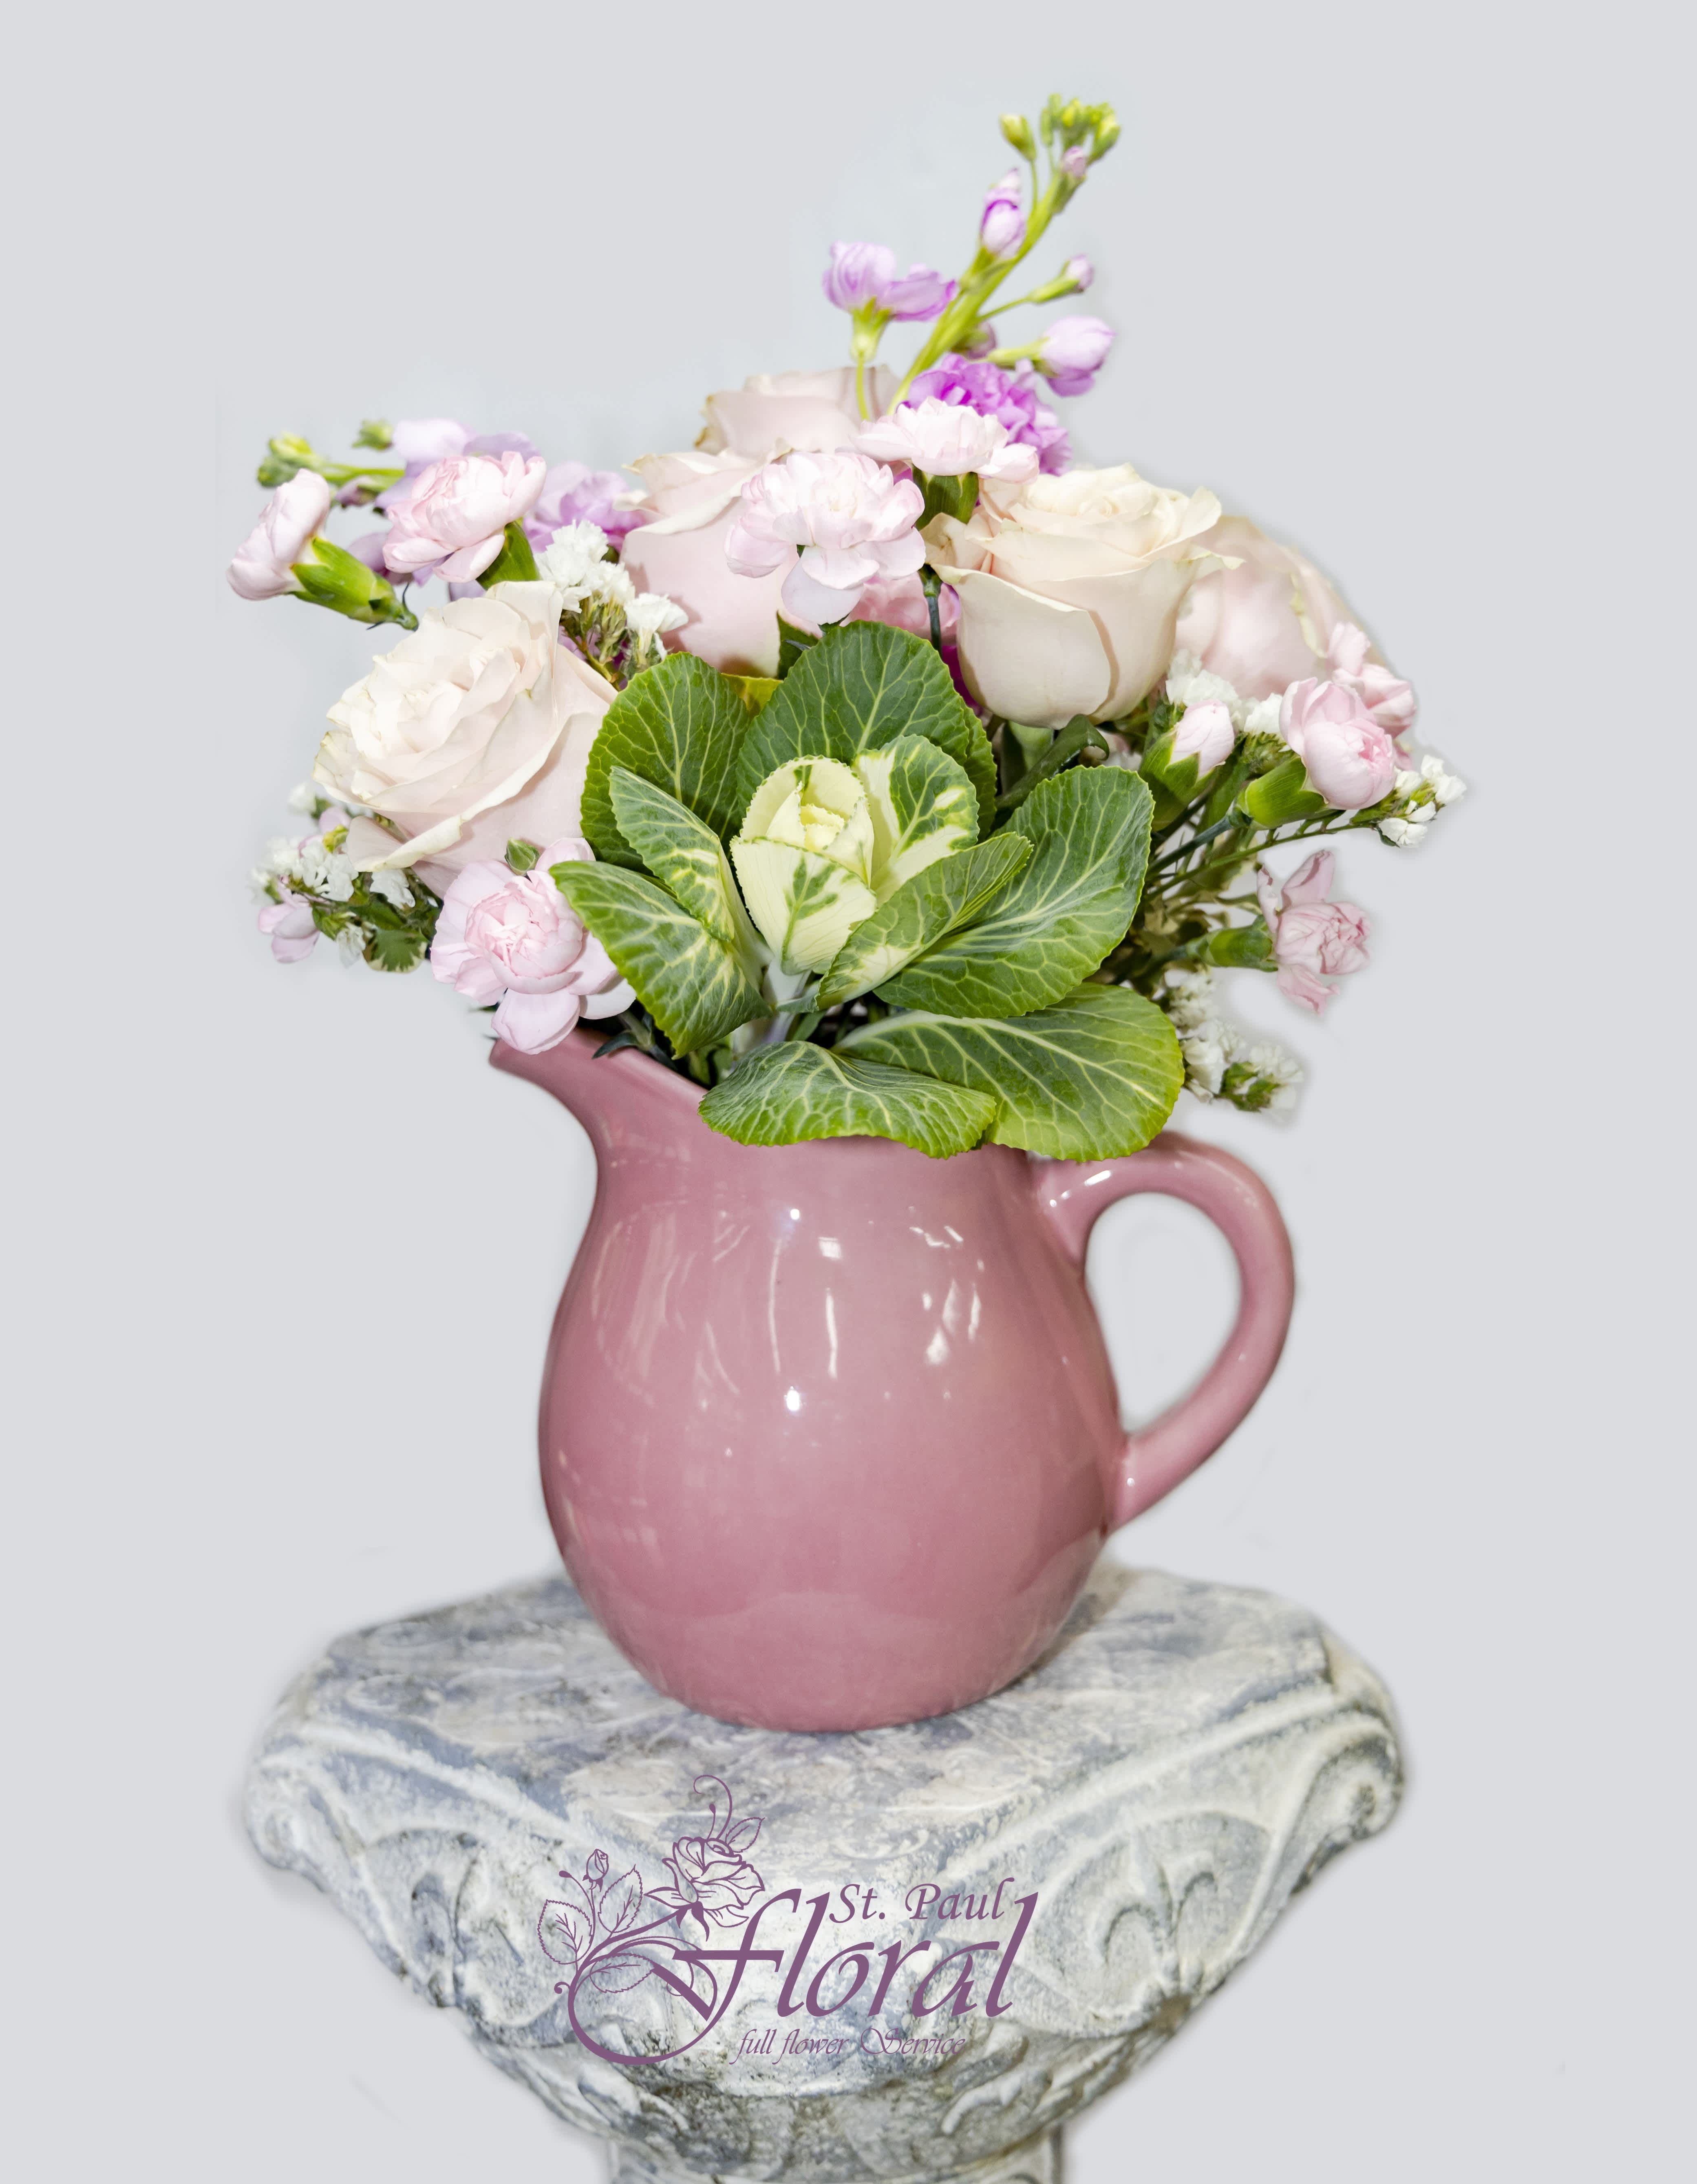 Spring Pitcher - This Spring Pitcher arrangement is the perfect gift for Spring. The light pastel shades of Roses, Stock, Mini Carnations and green flowering Kale will remind you that planting season is upon us. 